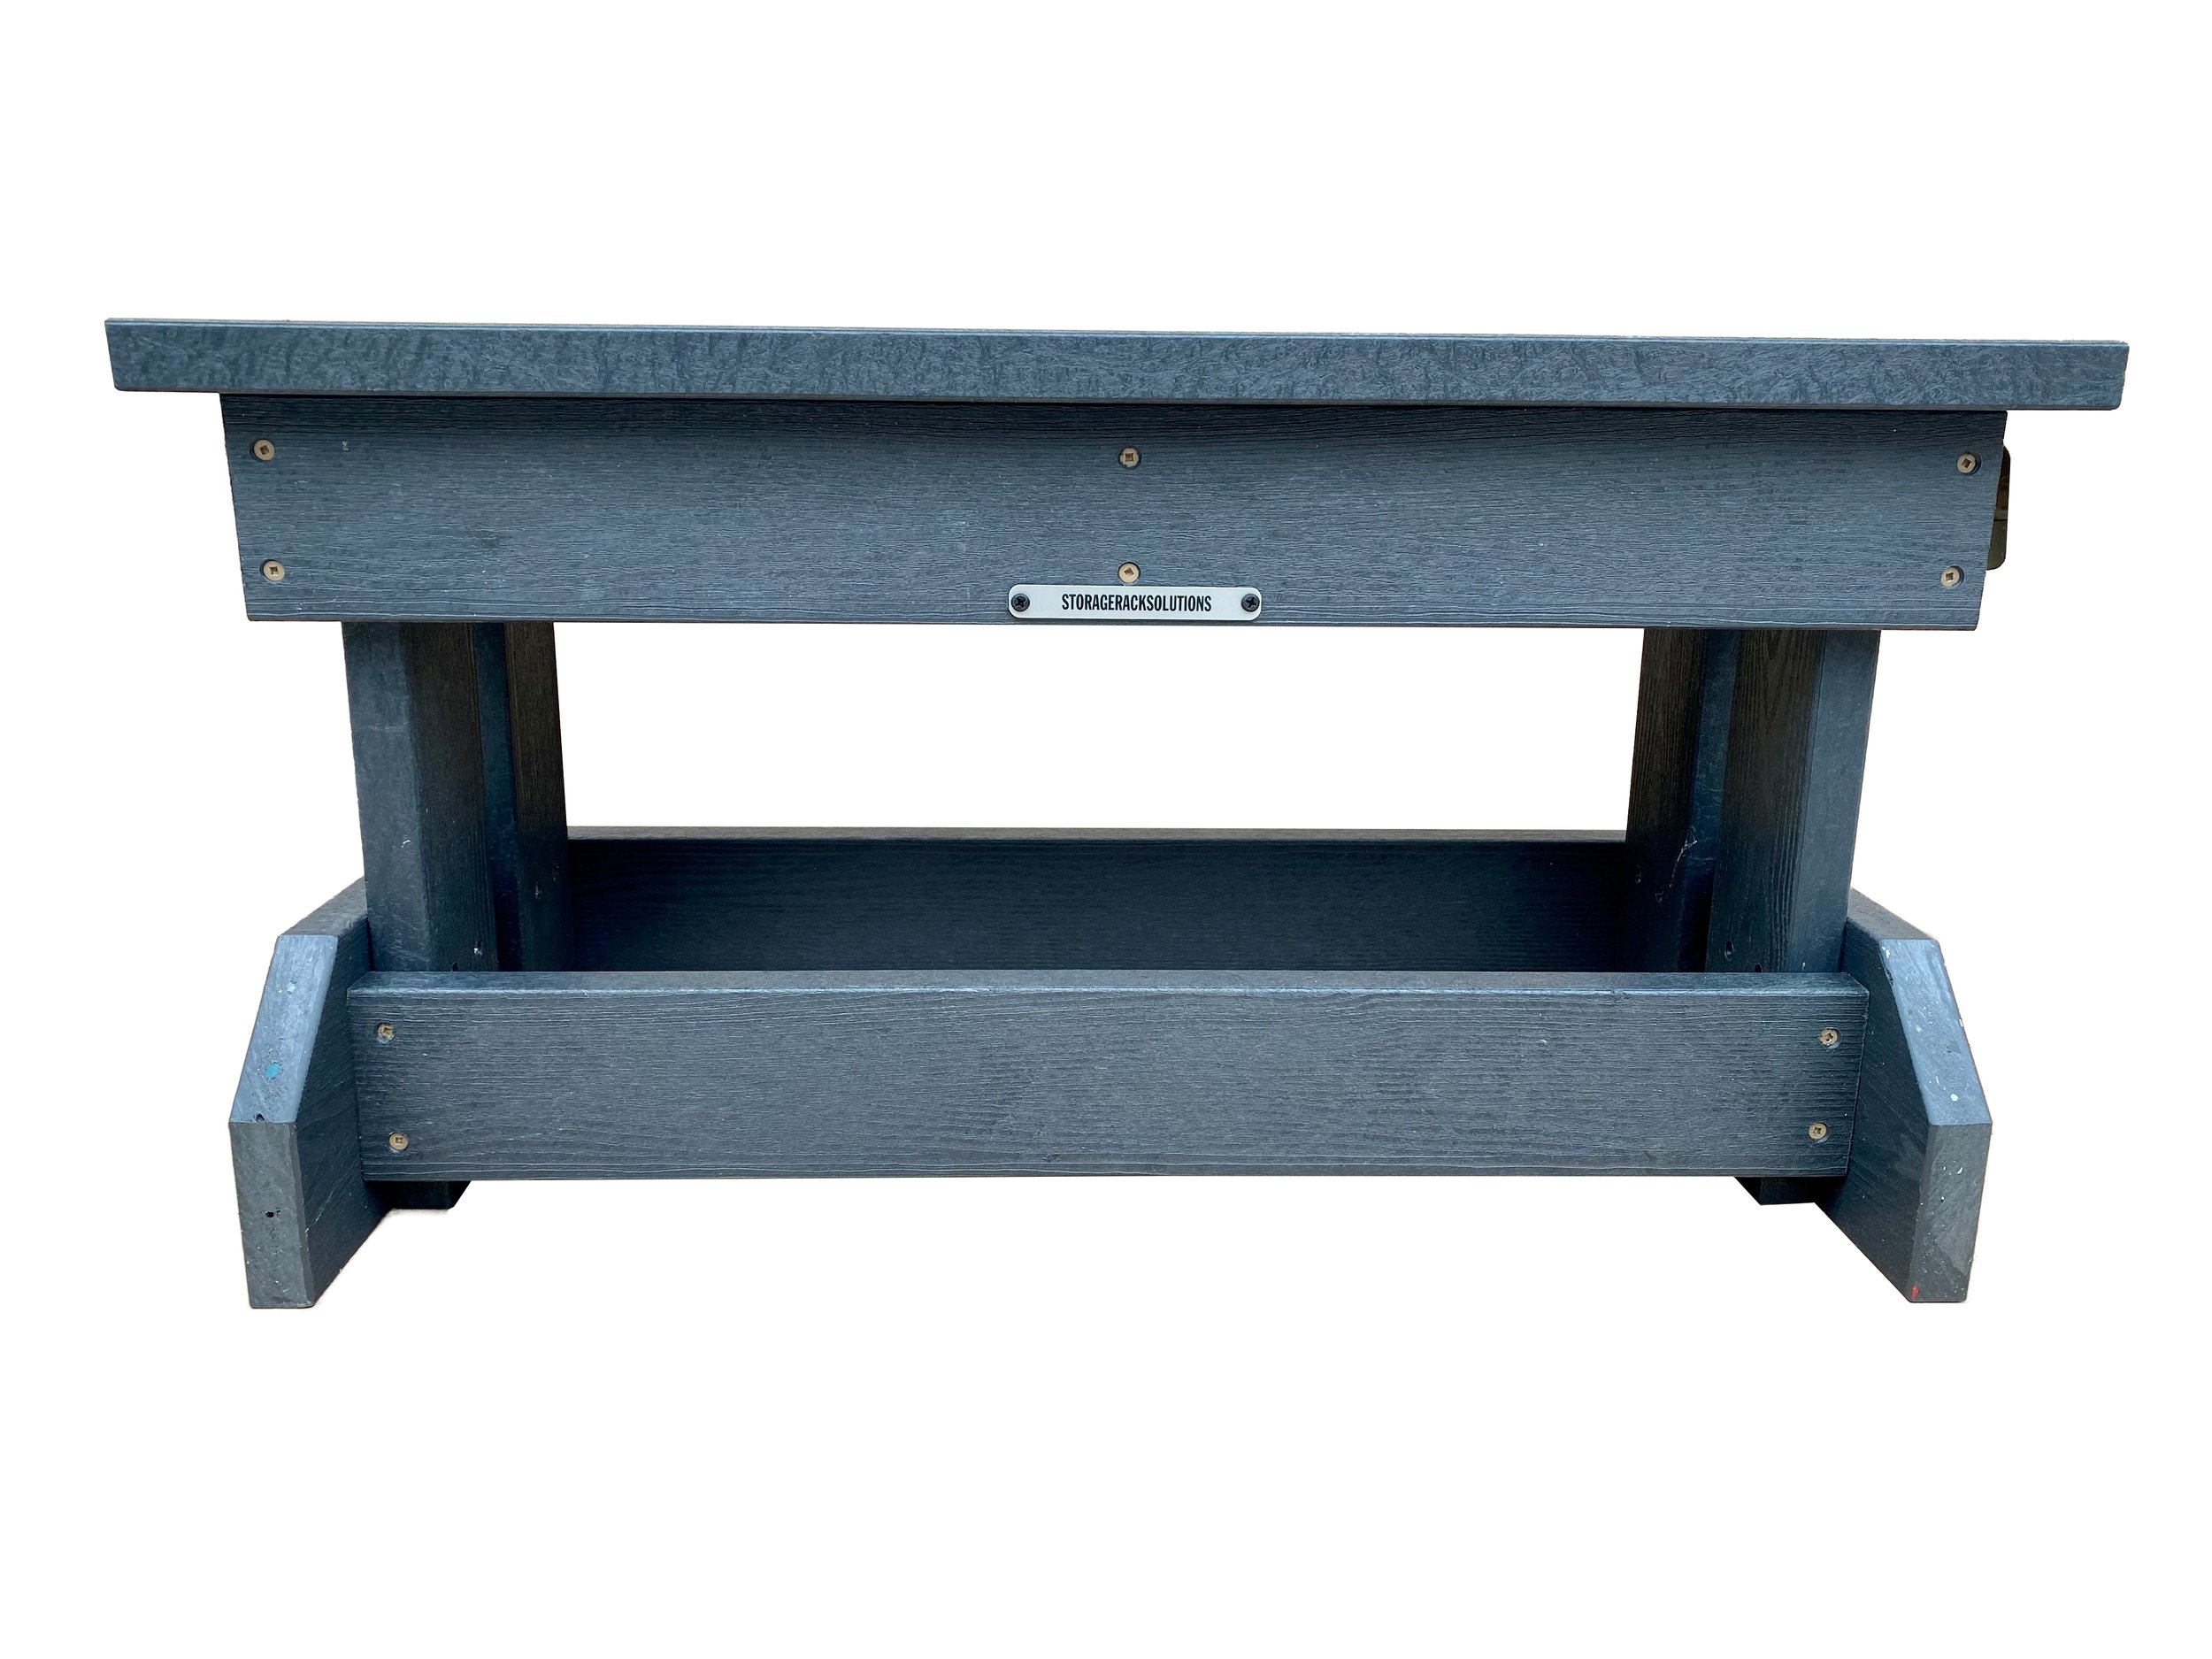 Storage Rack Solutions - Outdoor Benches - For Fire pit, Lawn, Garden - Medium Bench